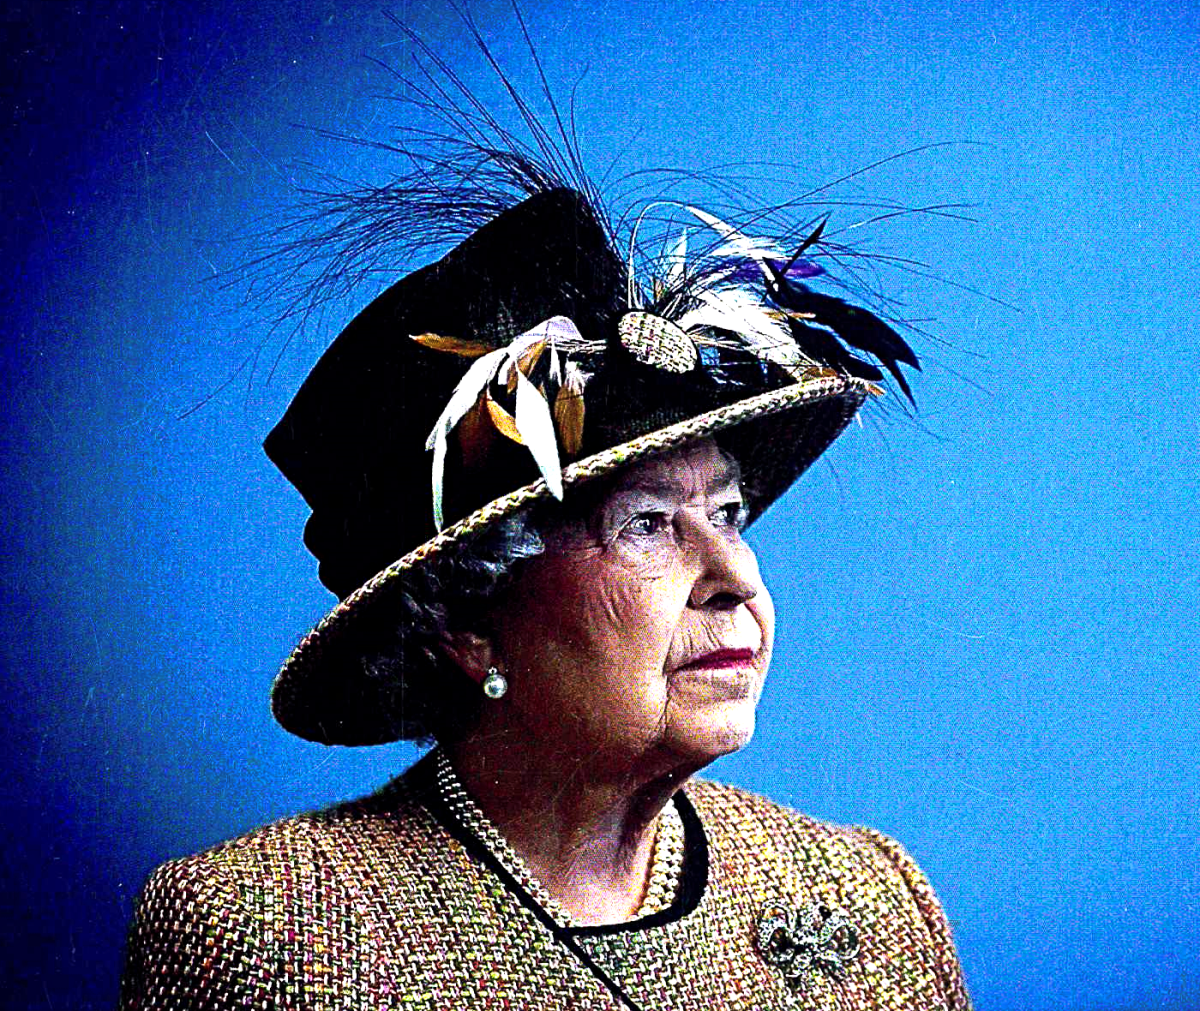 The Queen's hats were designed to her specifications.